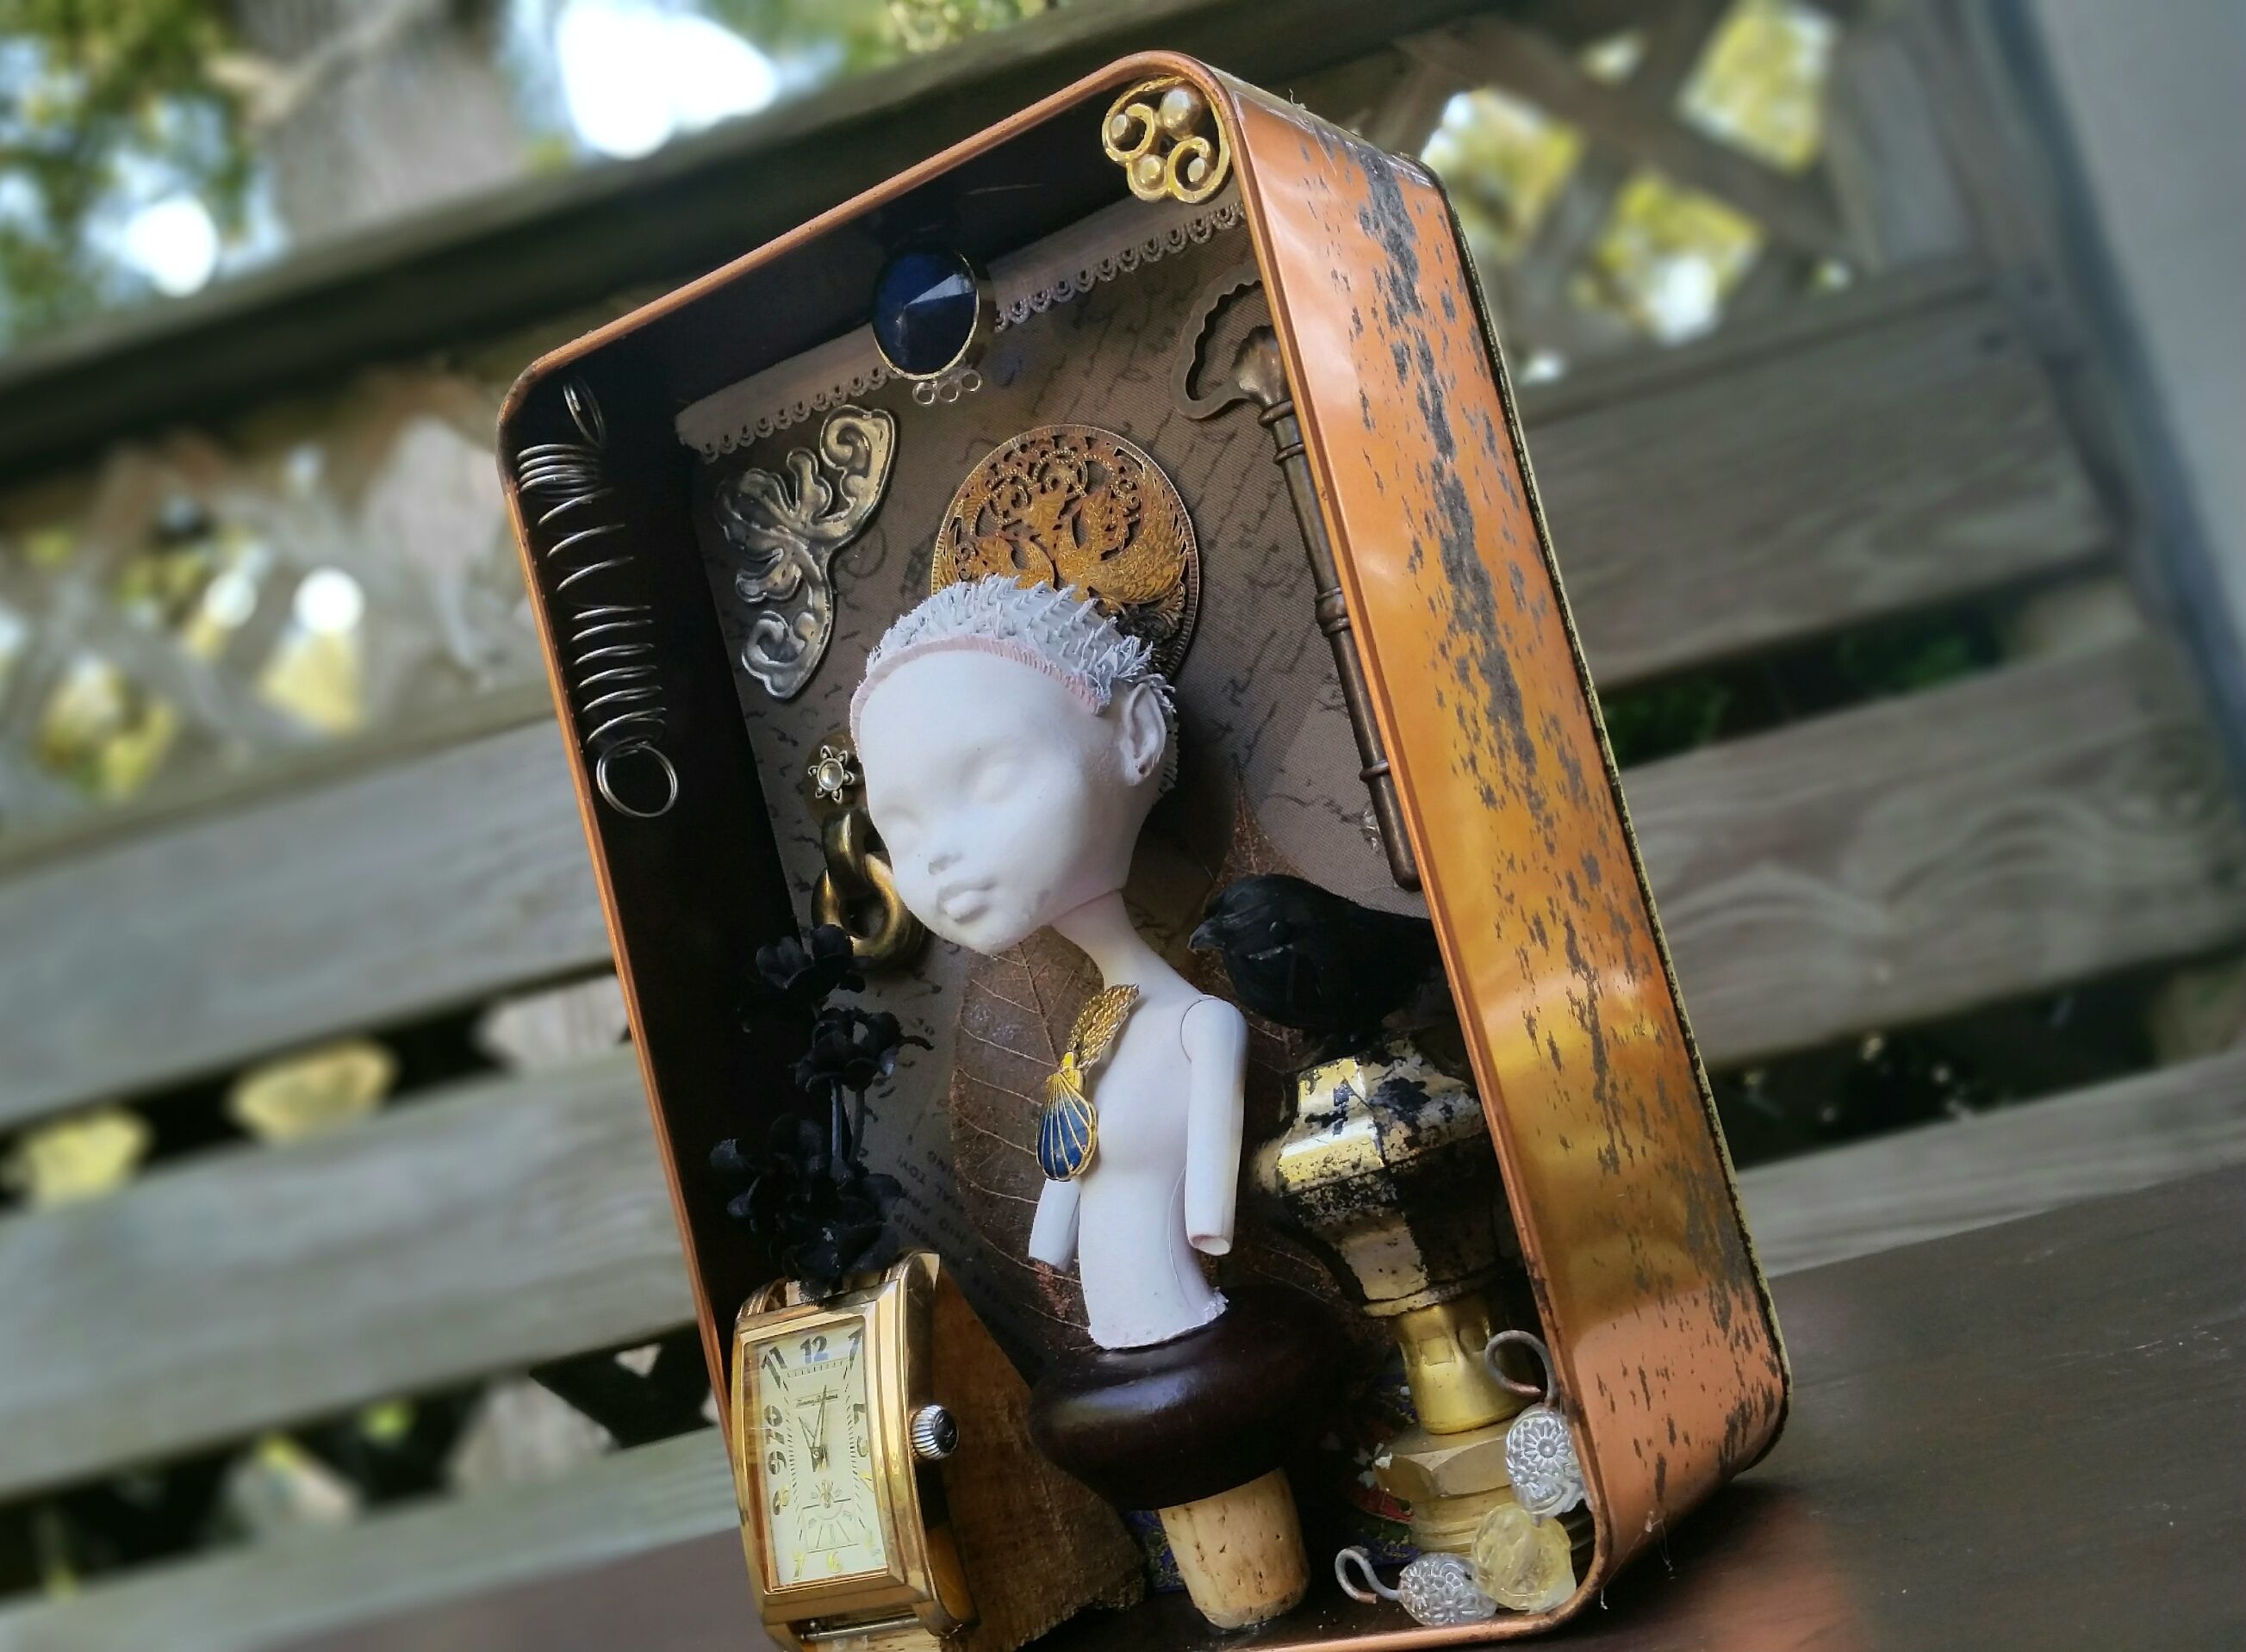 finished assemblage piece, a bust of a doll with a semi-steampunk aesthetic